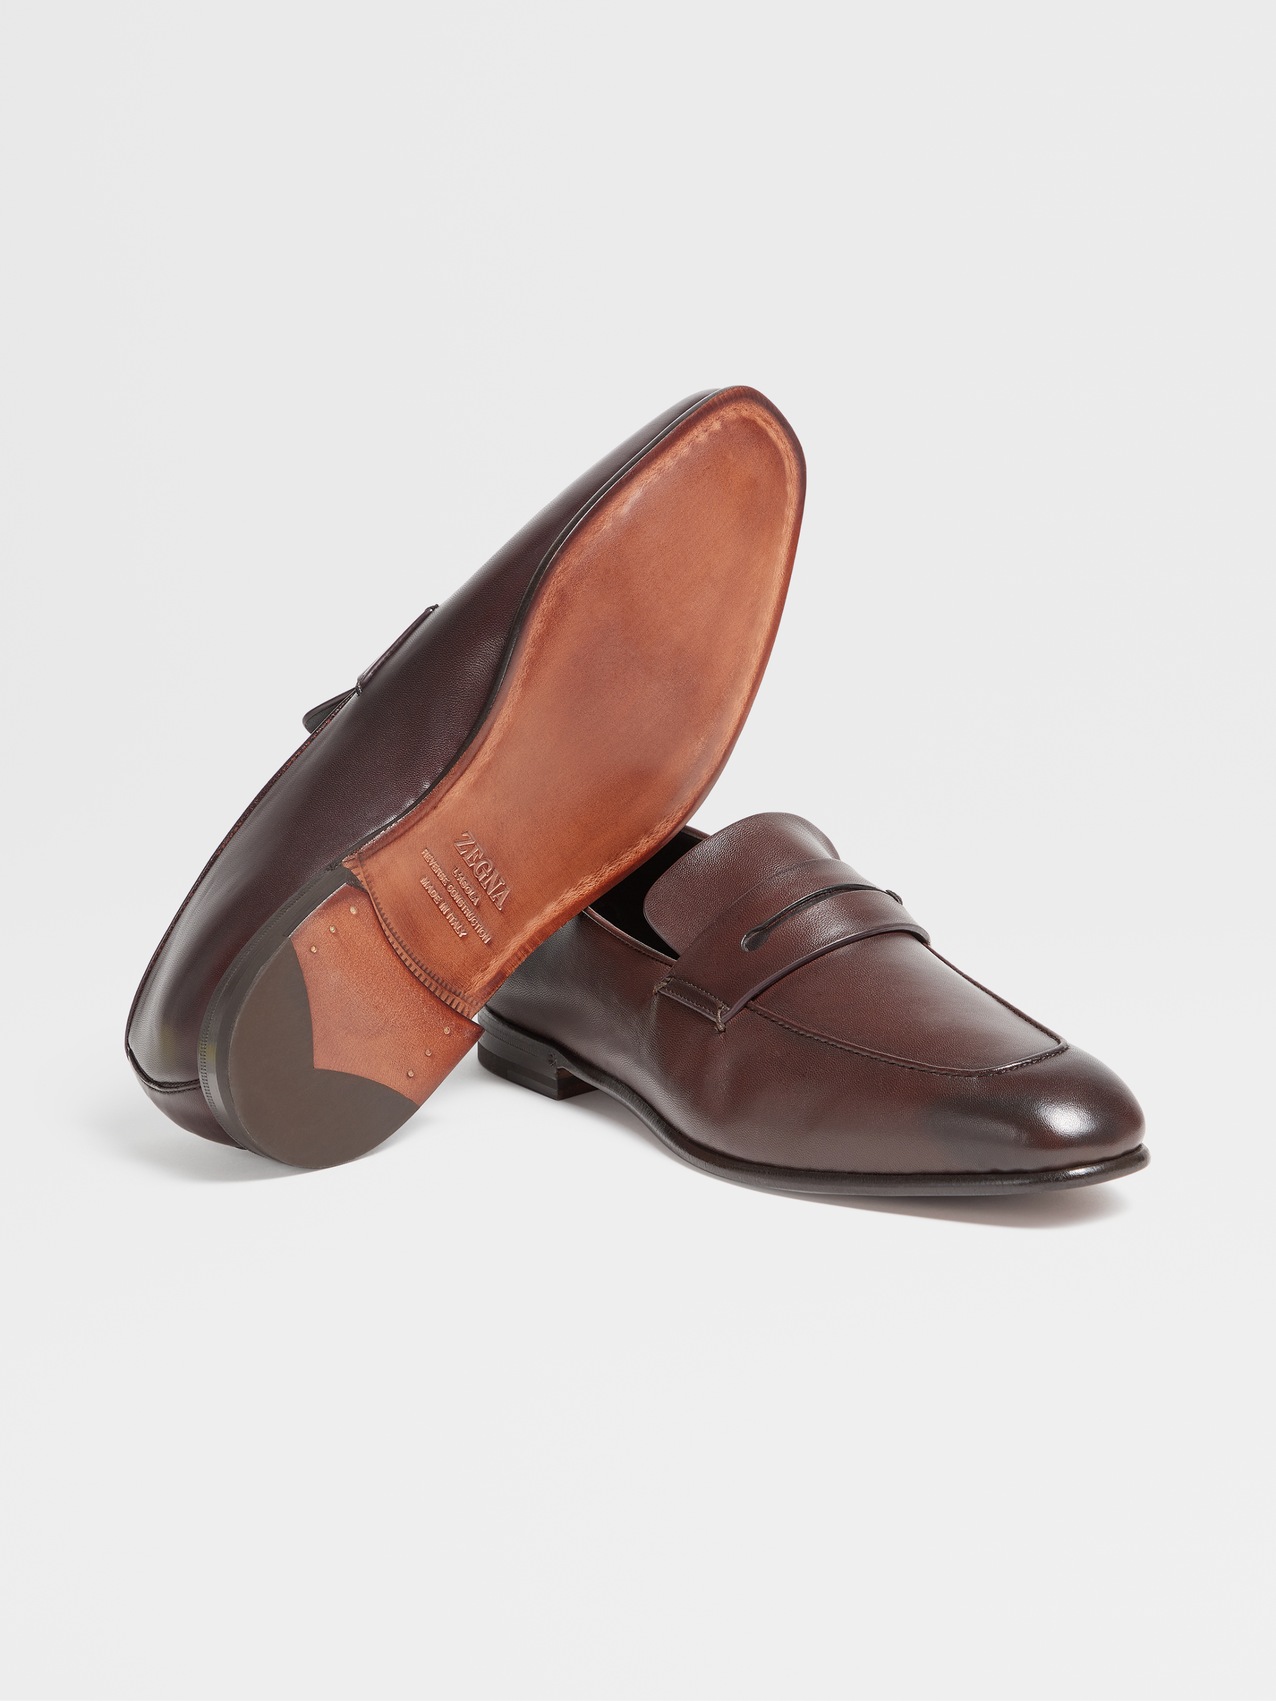 Dark Brown Leather L'Asola Loafers FW23 22117693 | Zegna